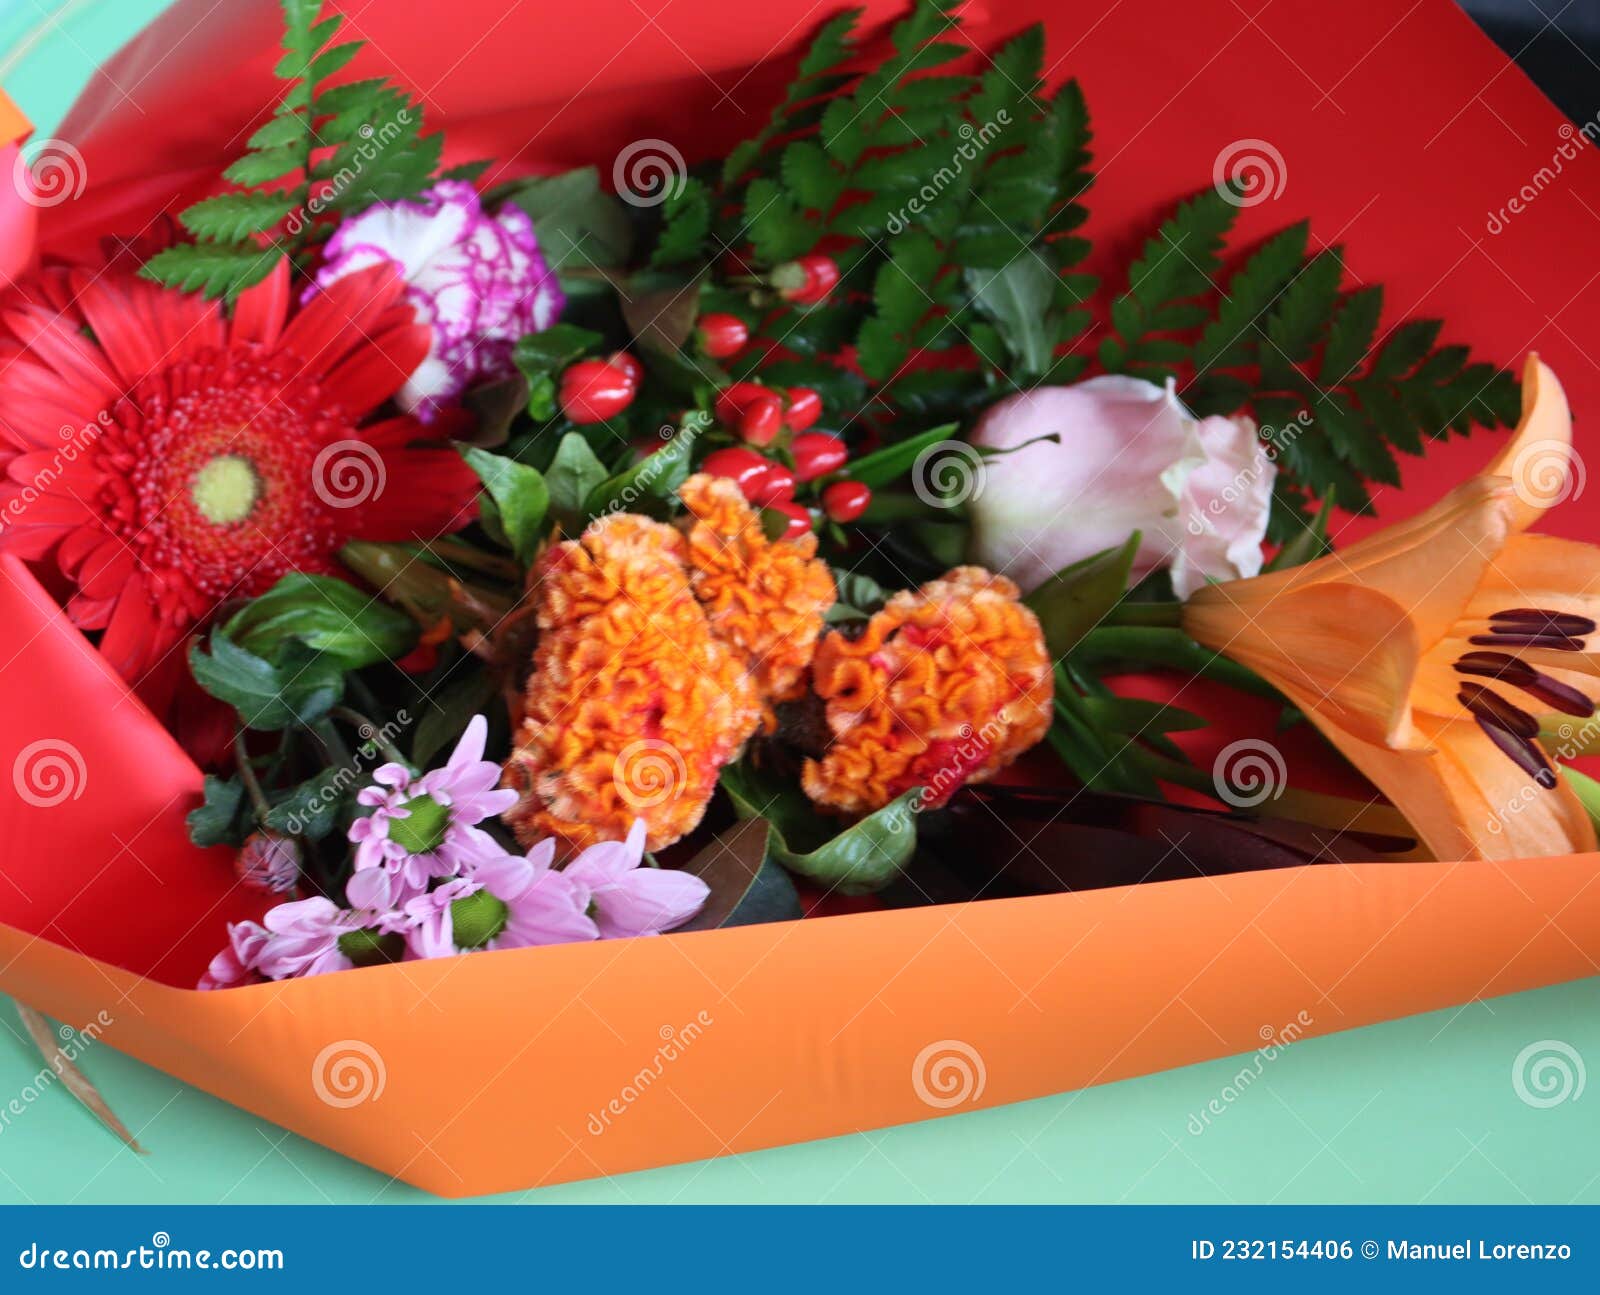 beautiful flowers colors natural smells delicate gift detail